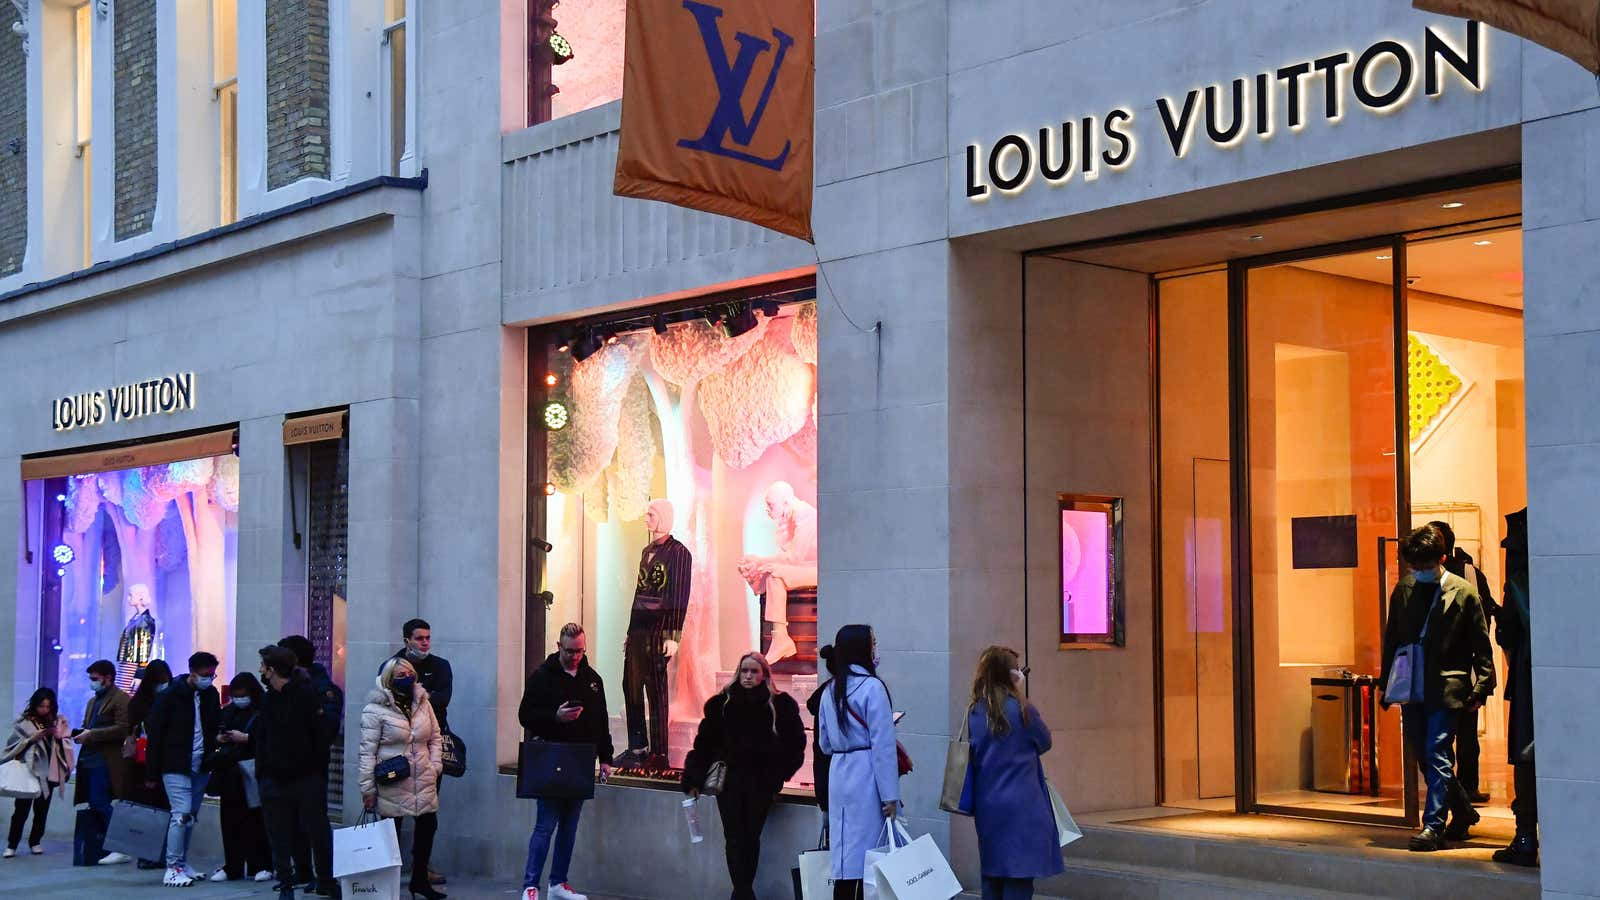 Louis Vuitton Among Most Valuable EU Brands, Dior Among the Strongest